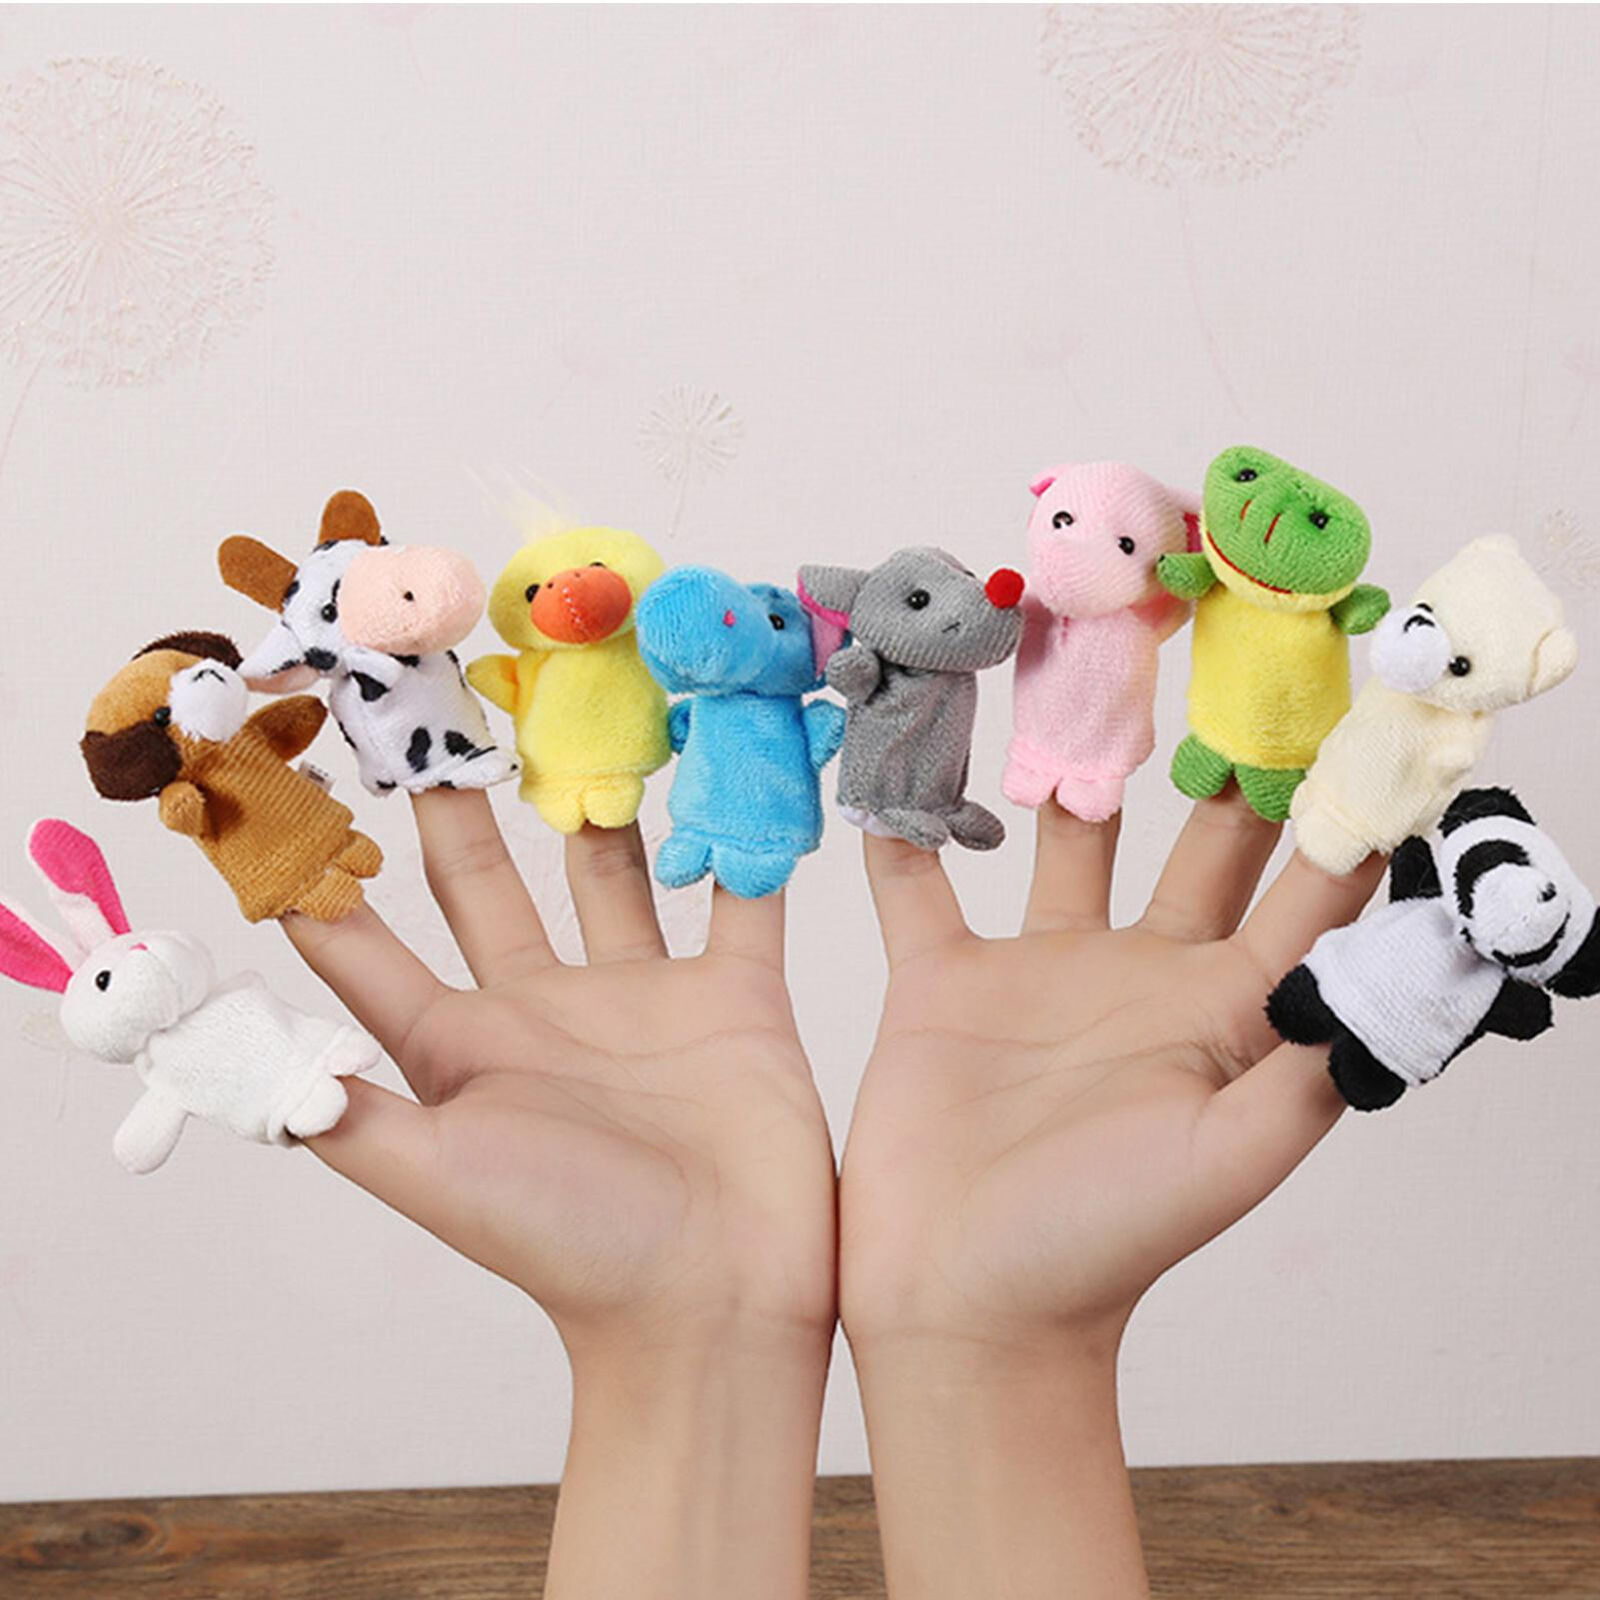 10pcs Finger Puppets Set Plush Animal Finger Puppets Hand Toy for Story Telling